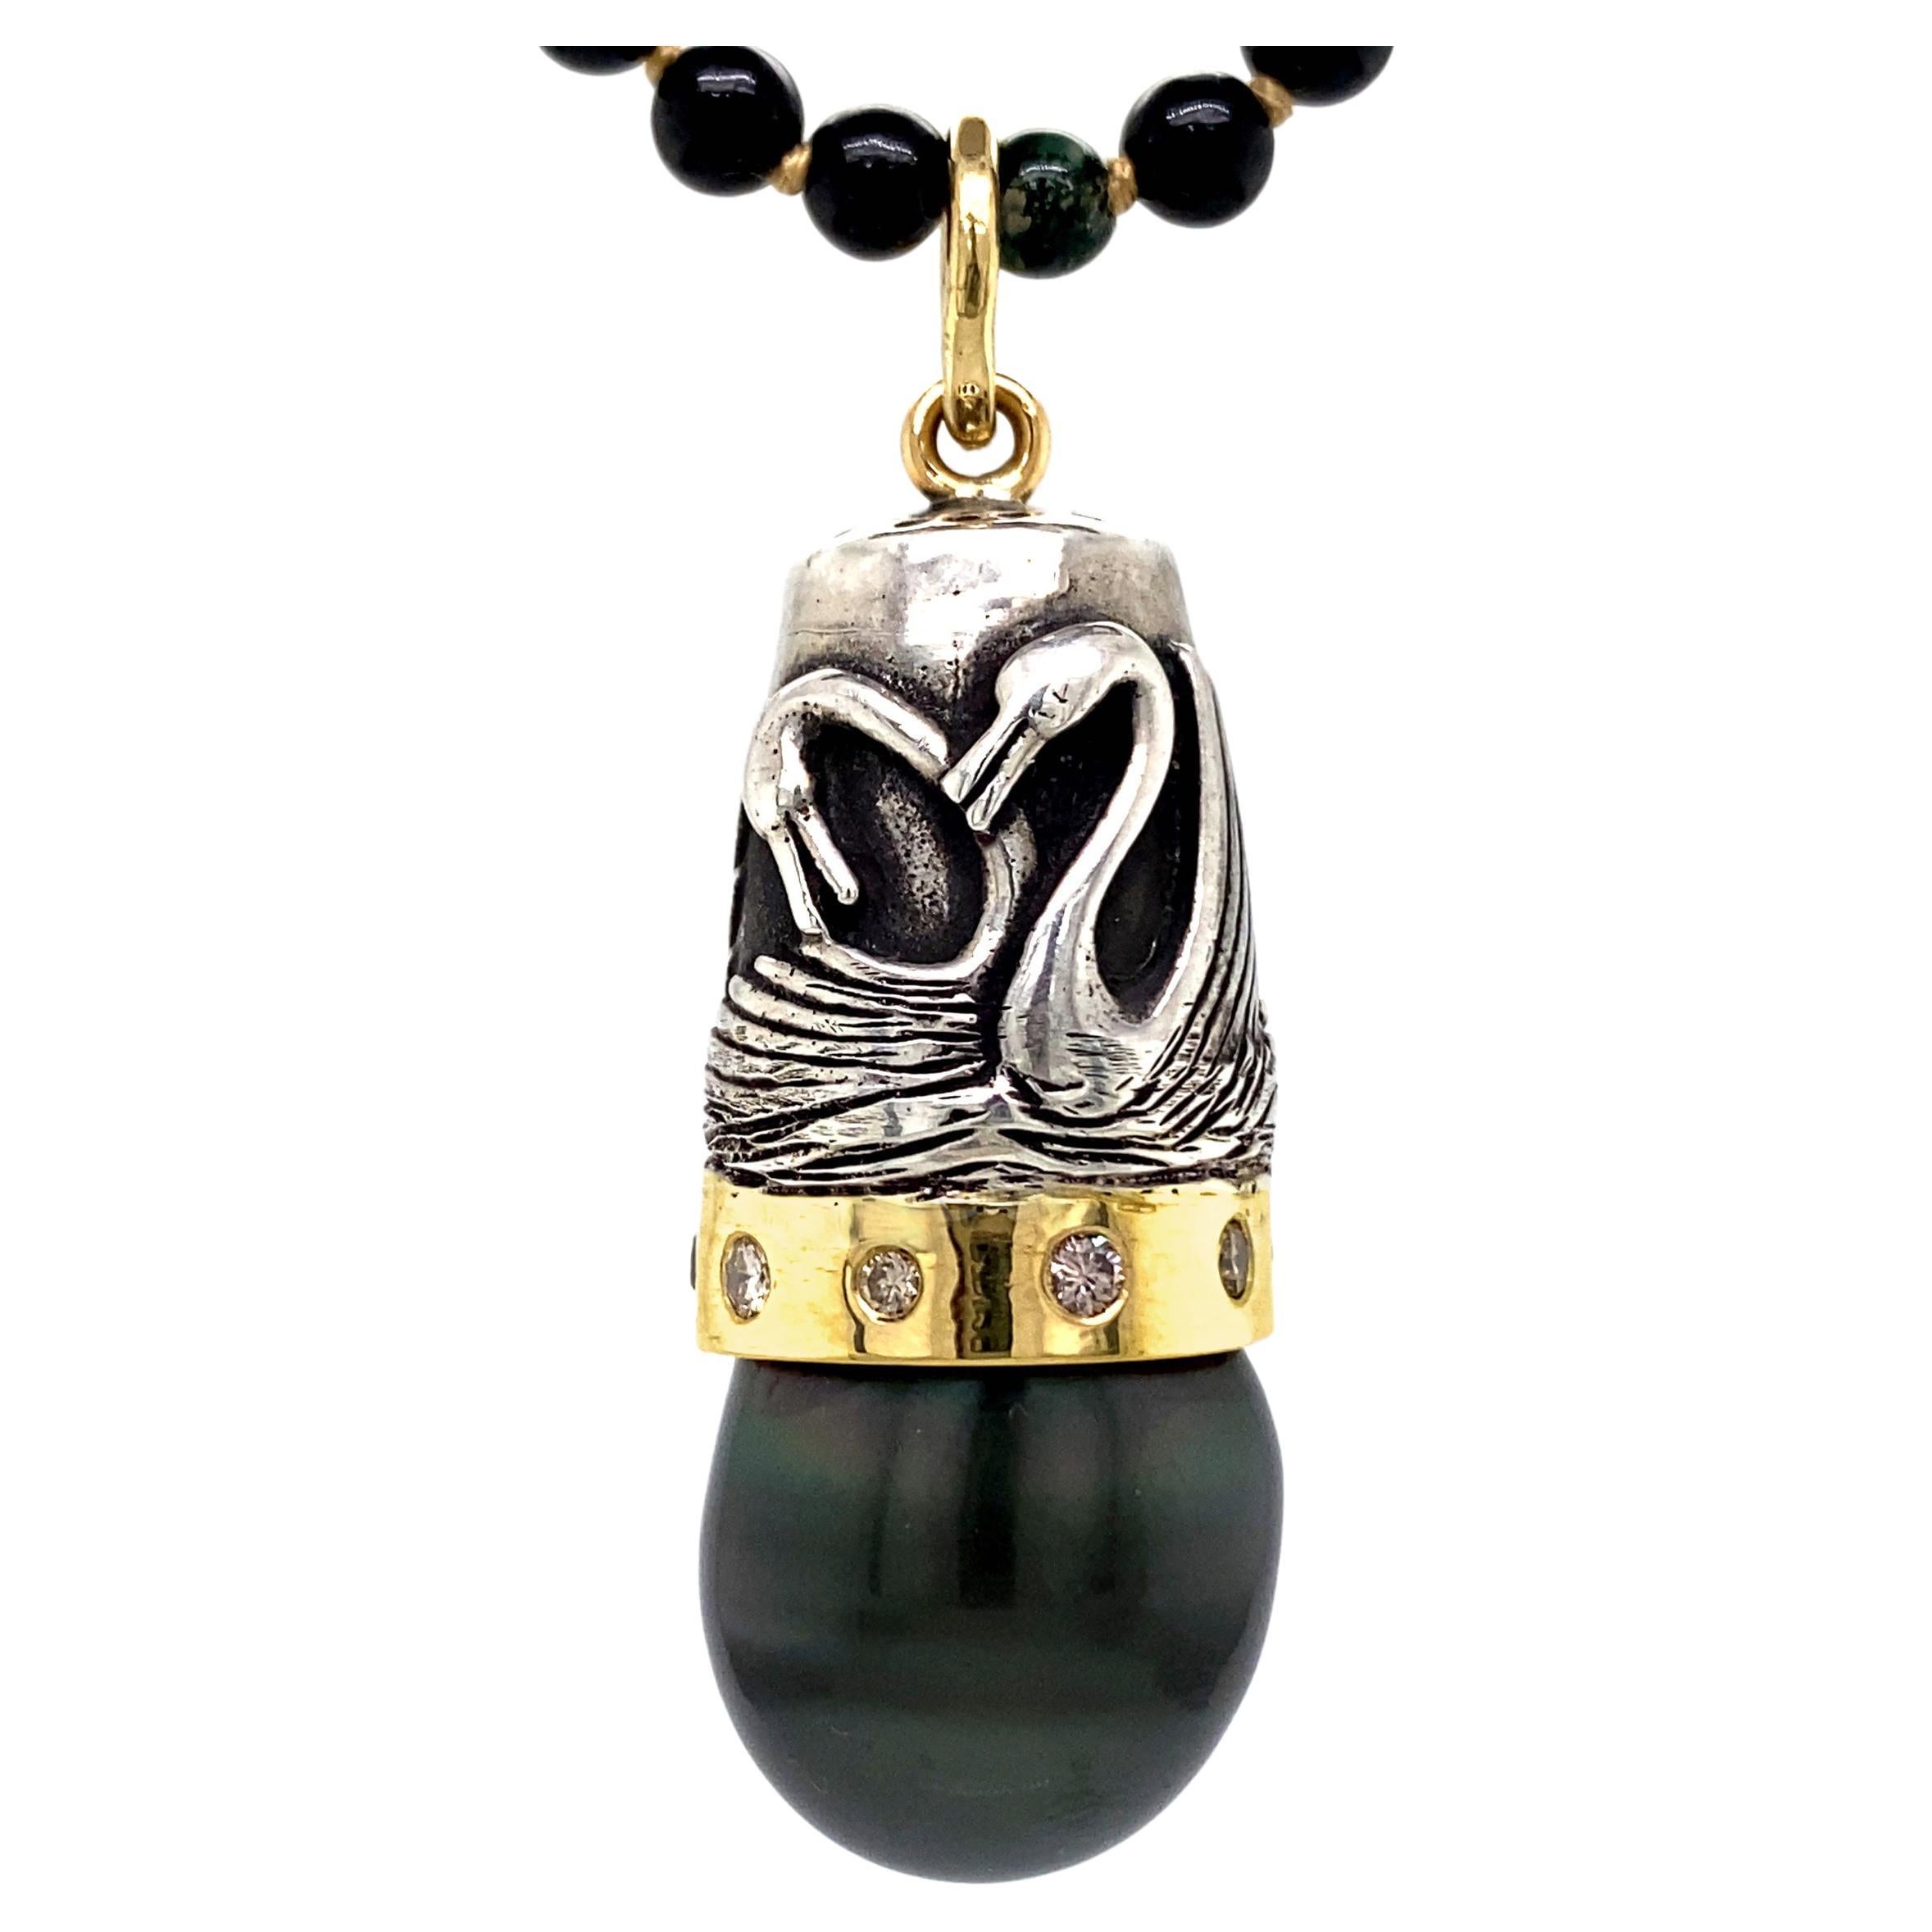 Tahitian Pearl Fob with 18K Gold & Diamond Bezel Topped by Sterling Swan Thimble For Sale